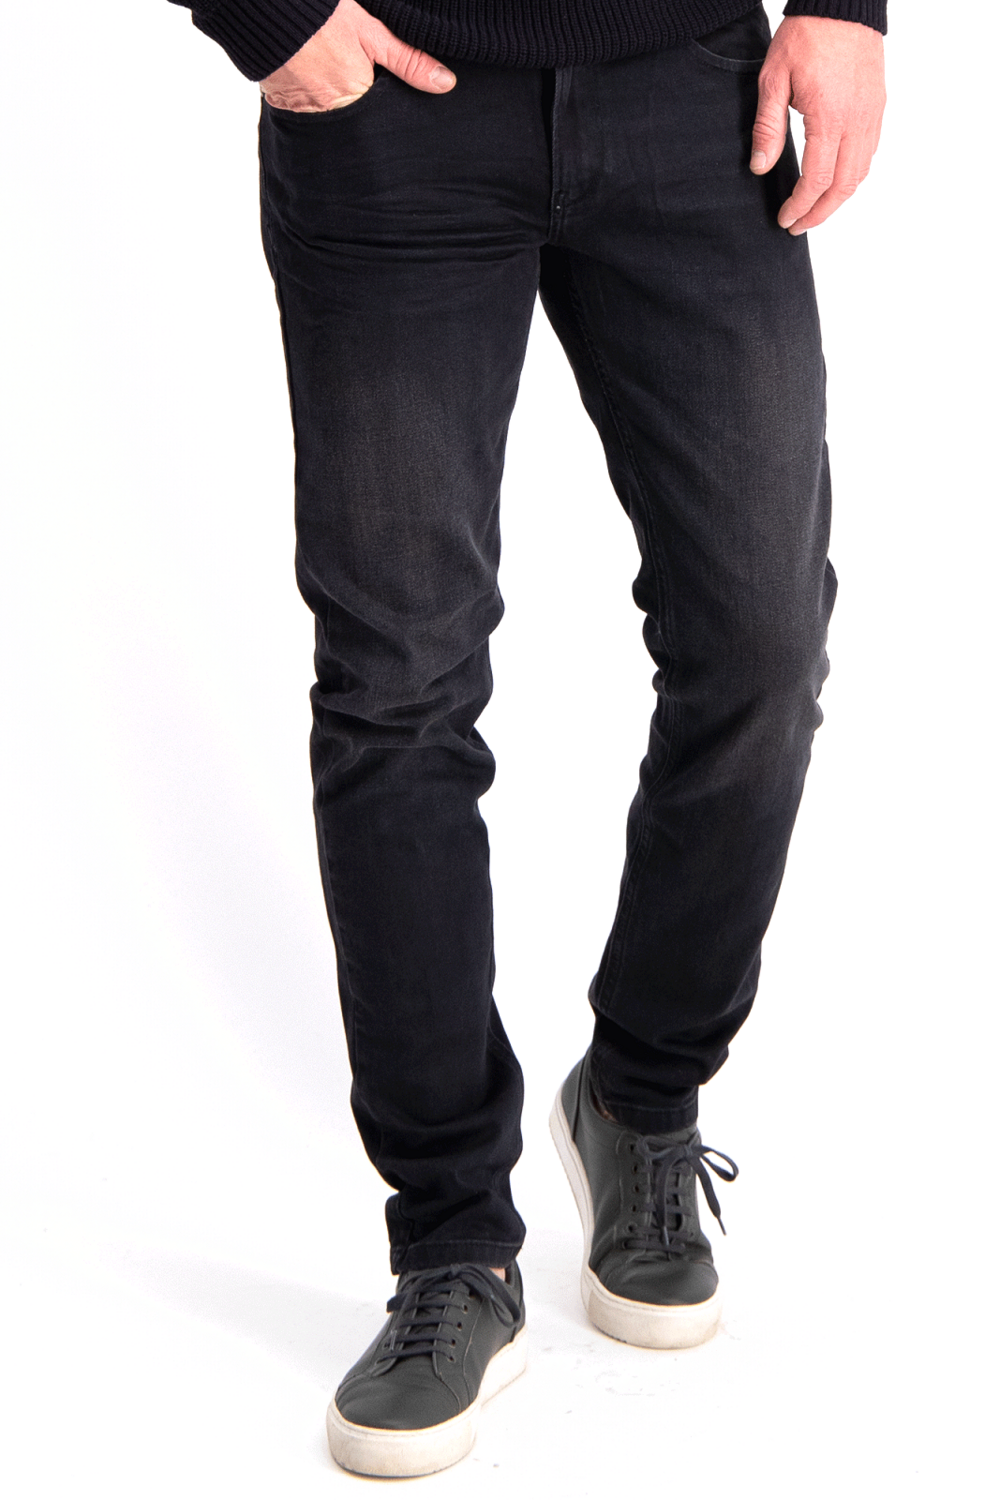 Cars Jeans SHIELD tapered fit - Black Used